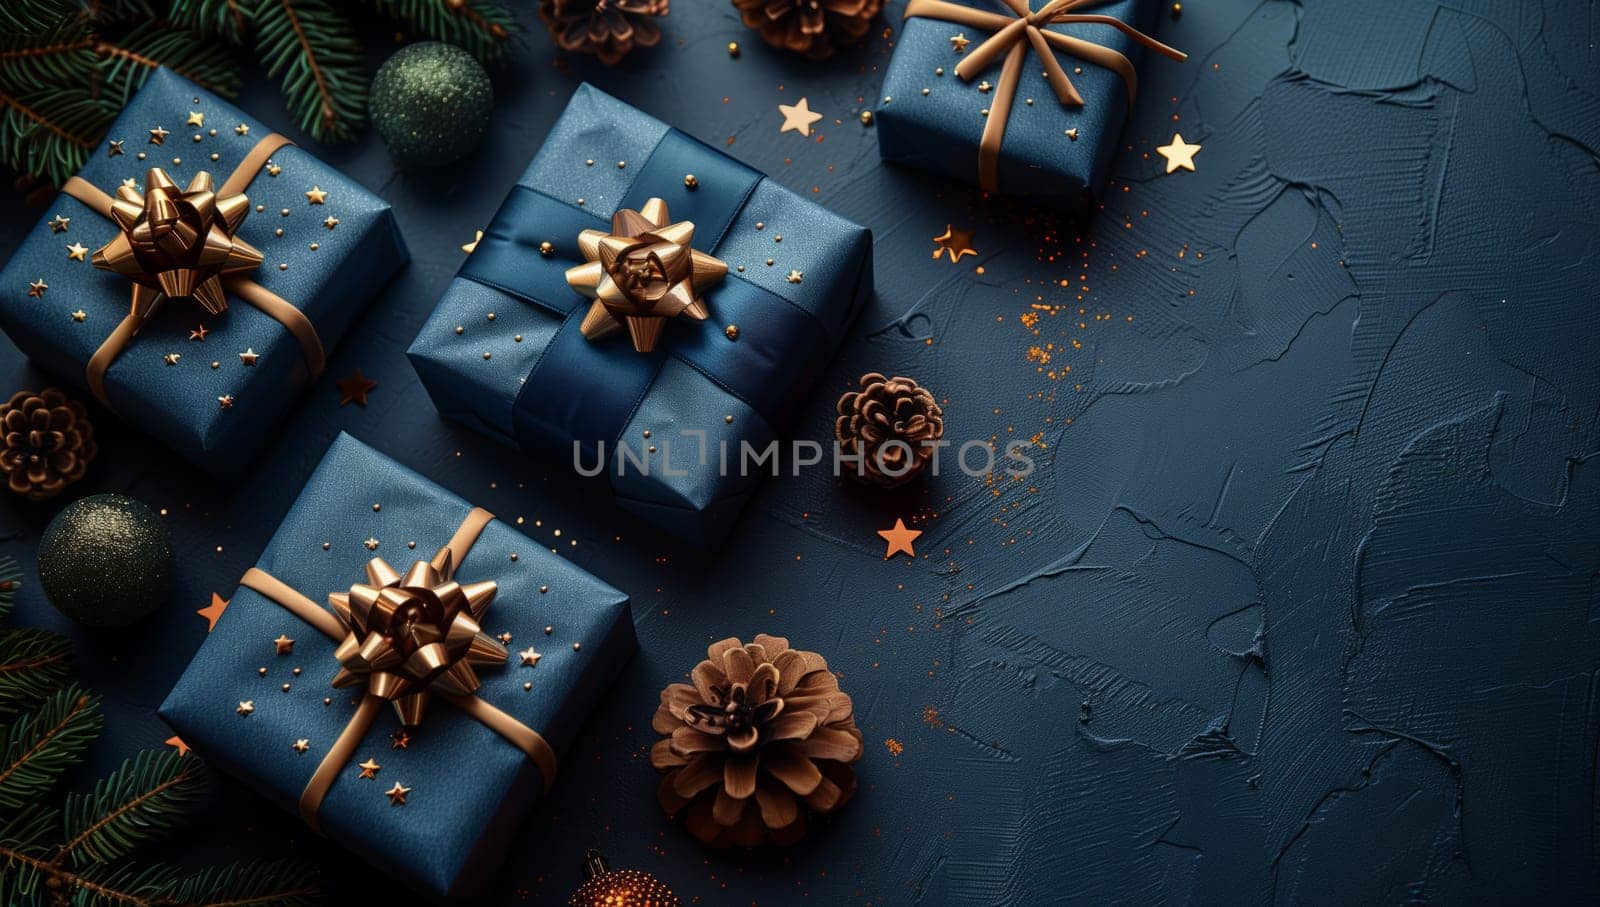 A cluster of electric blue Christmas gifts adorned with gold bows stand out against a dark blue backdrop, creating a festive and stylish display